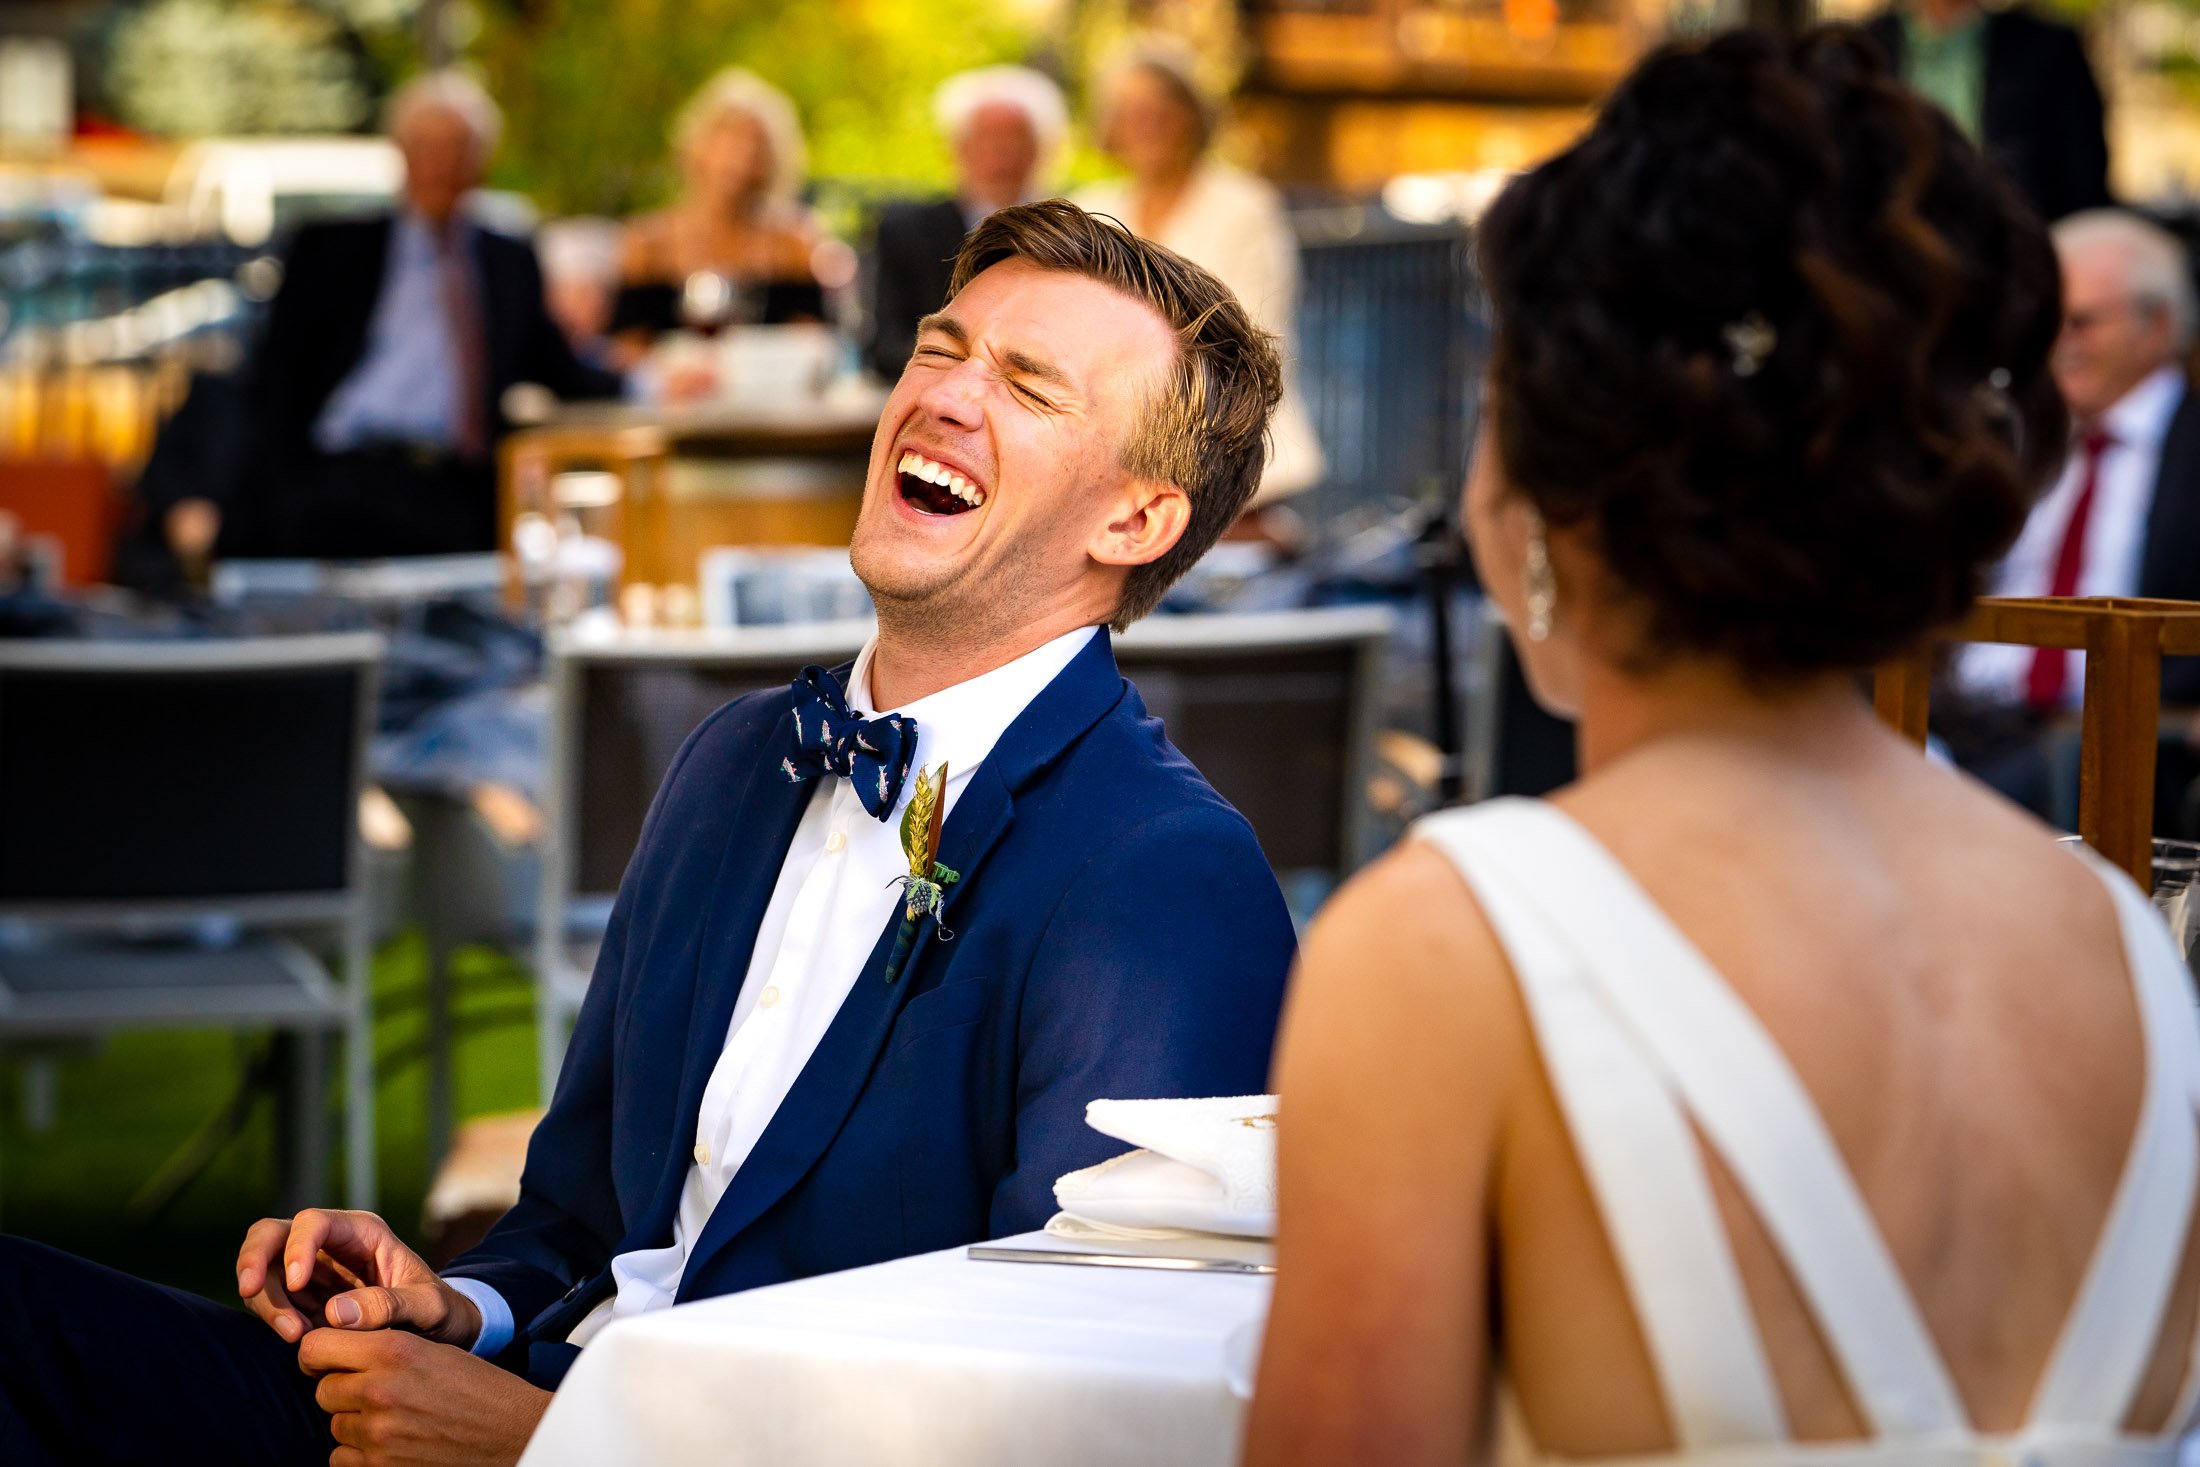 Bride and groom react to reception speeches while sitting on outdoor patio during the wedding reception, wedding, wedding photos, wedding photography, wedding photographer, wedding inspiration, wedding photo inspiration, wedding portraits, wedding ceremony, wedding reception, mountain wedding, Catholic Church wedding, Catholic Church wedding photos, Catholic Church wedding photography, Catholic Church wedding photographer, Catholic Church wedding inspiration, Catholic Church wedding venue, Steamboat Springs wedding, Steamboat Springs wedding photos, Steamboat Springs wedding photography, Steamboat Springs wedding photographer, Colorado wedding, Colorado wedding photos, Colorado wedding photography, Colorado wedding photographer, Colorado mountain wedding, Colorado wedding inspiration